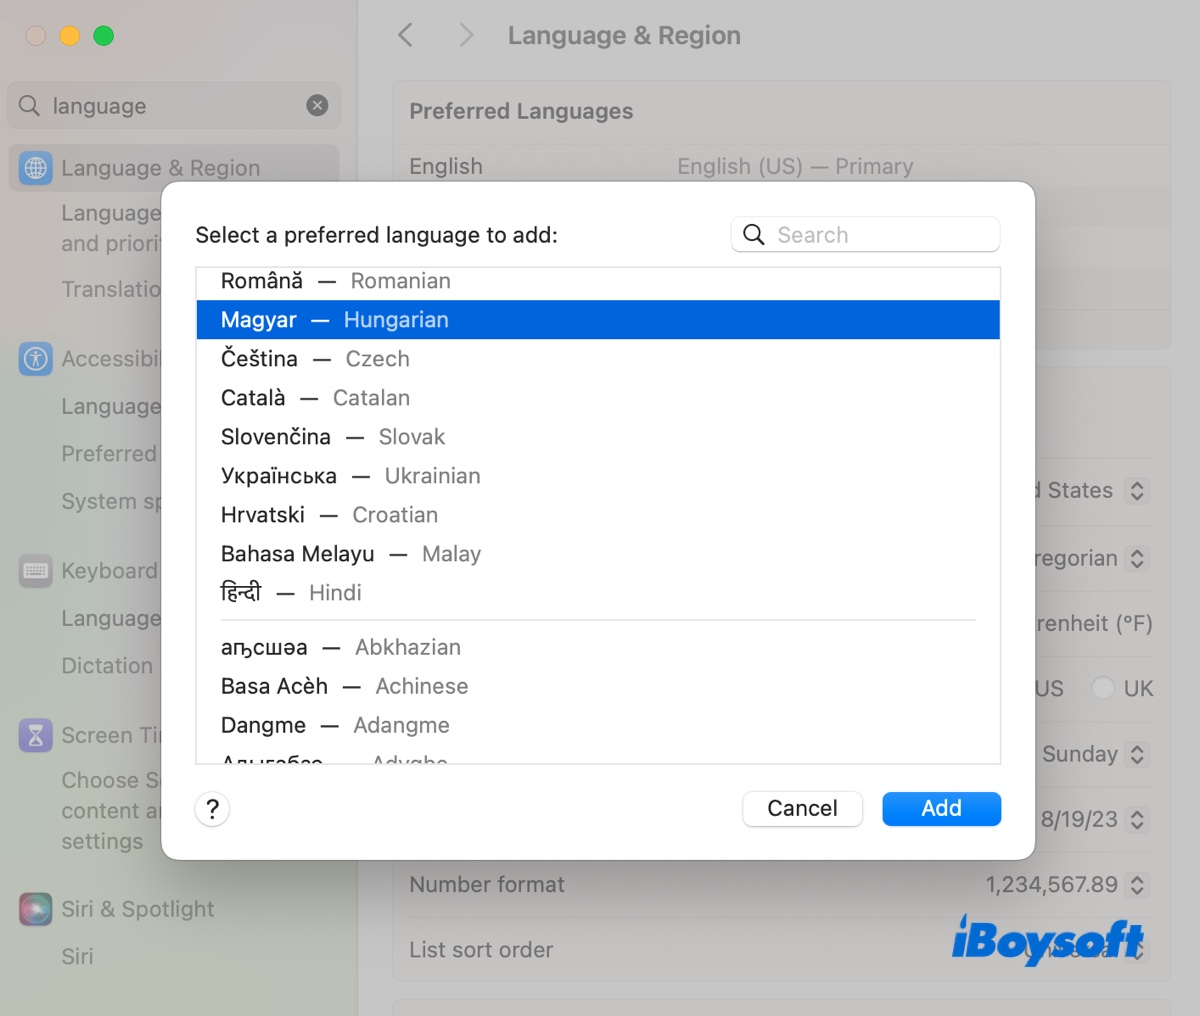  Select the language you want to change to